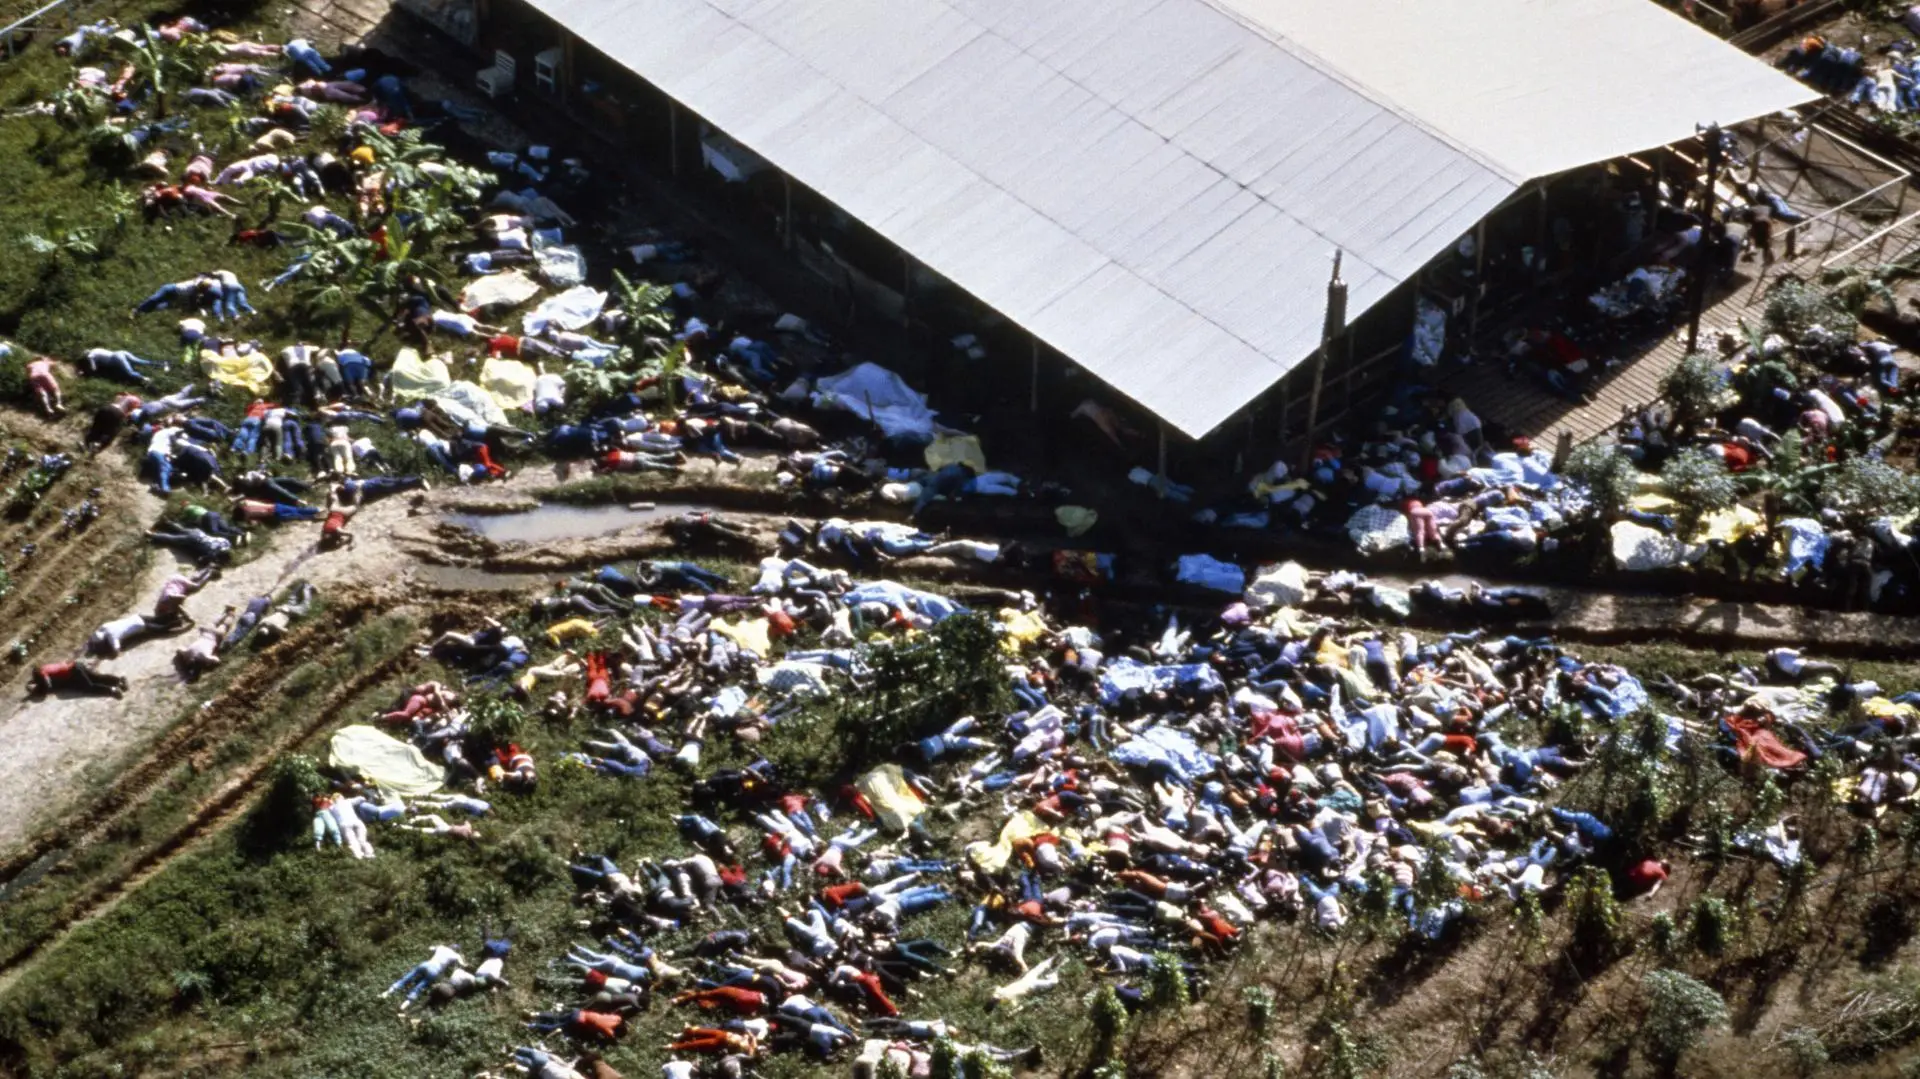 Jonestown: The Life and Death of Peoples Temple_peliplat